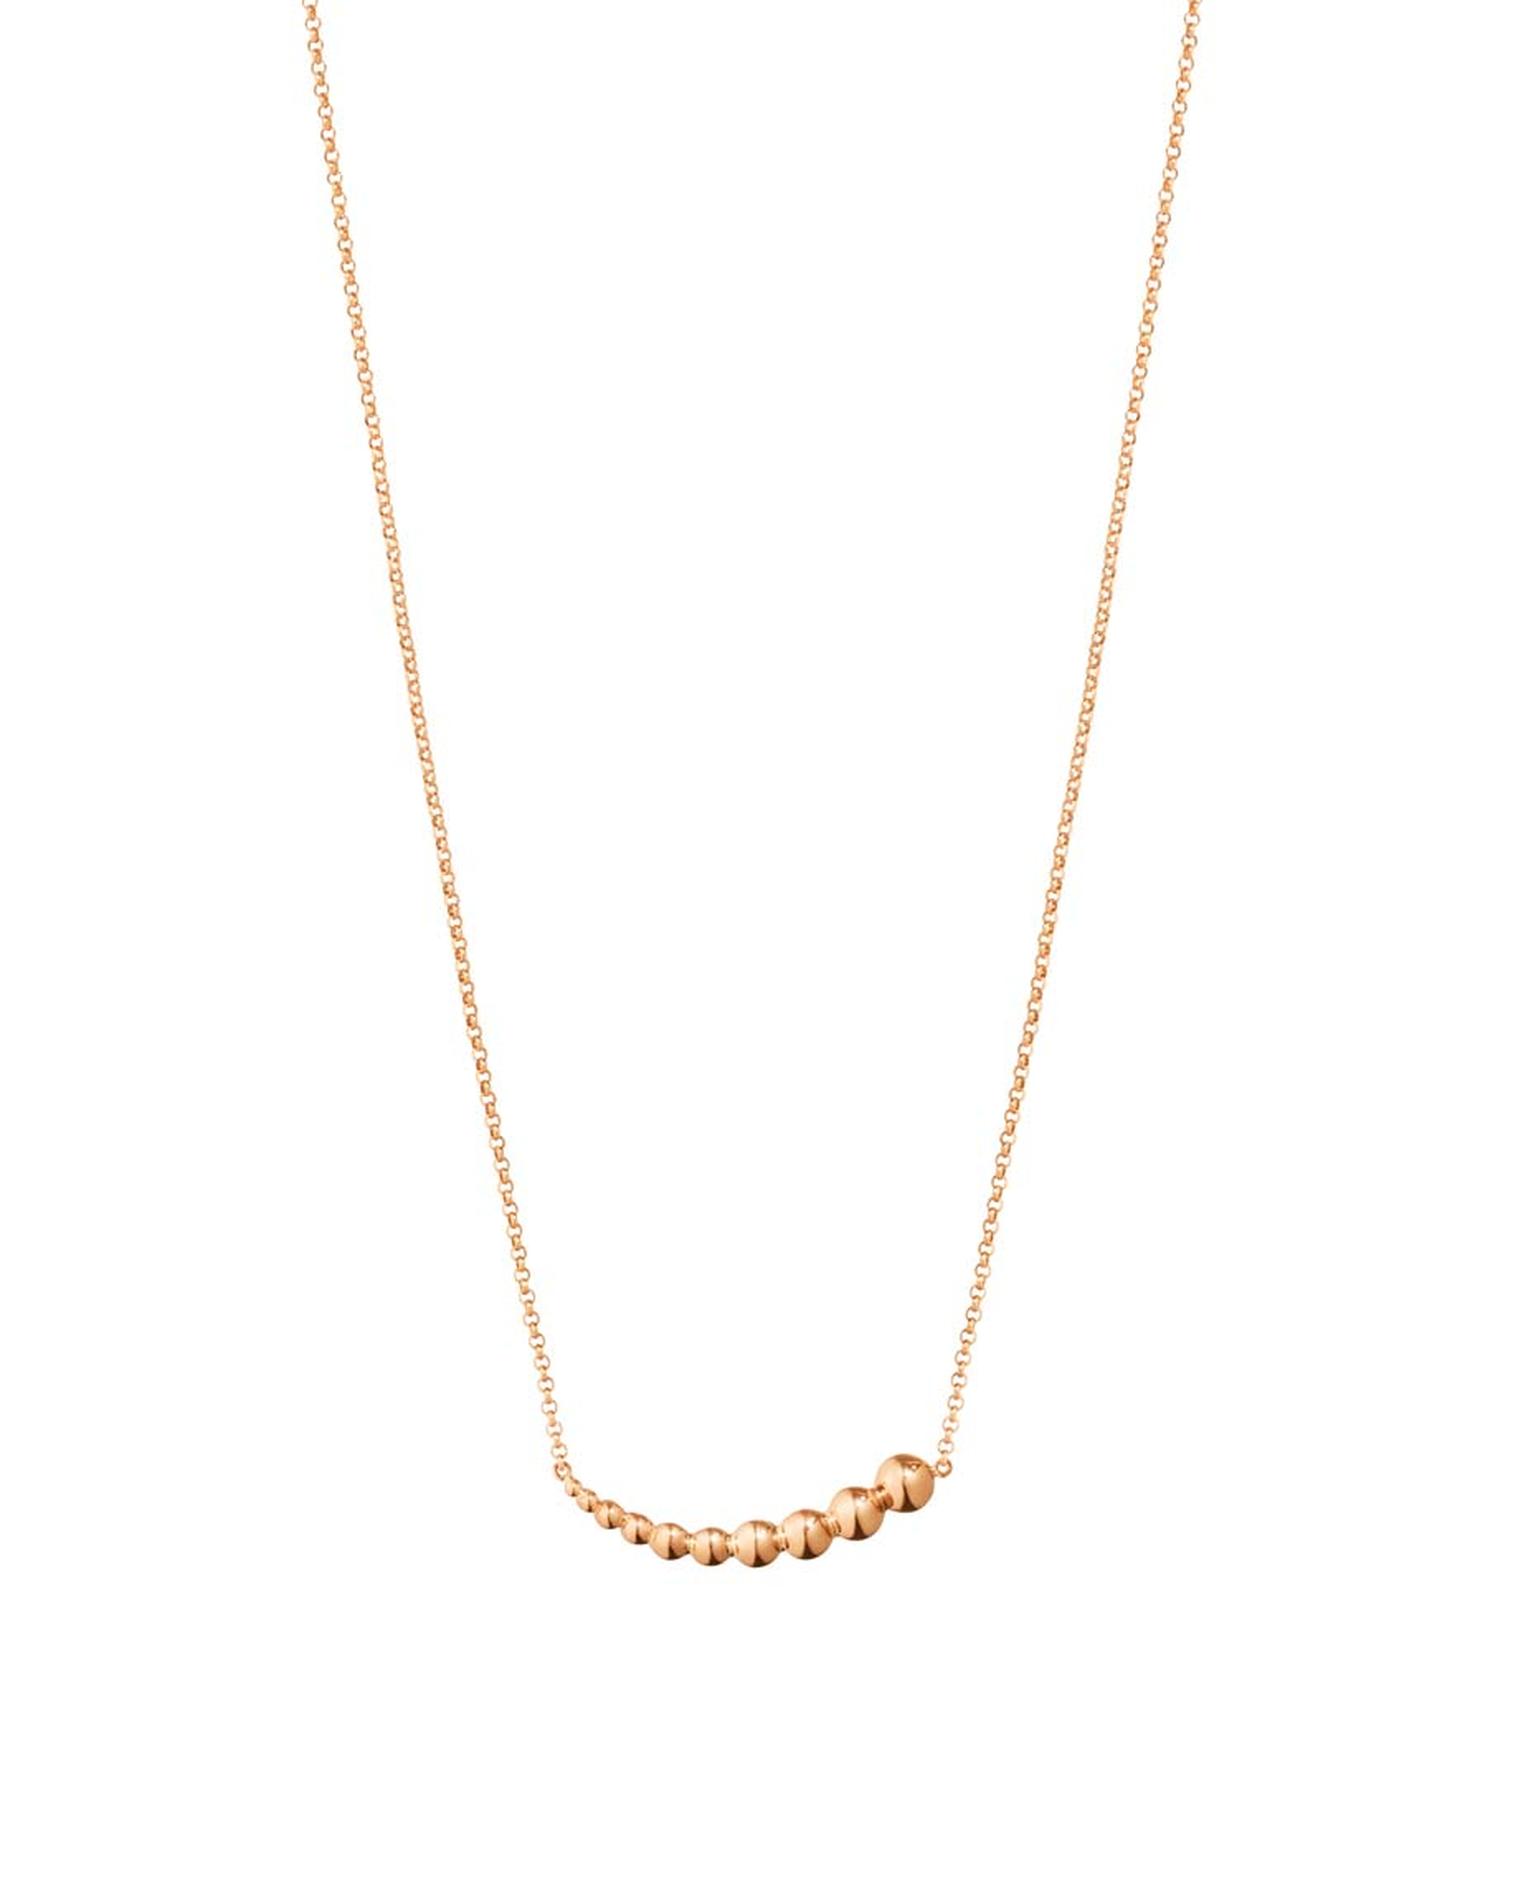 Georg Jensen rose gold pendant necklace from the Moonlight Grapes collection.